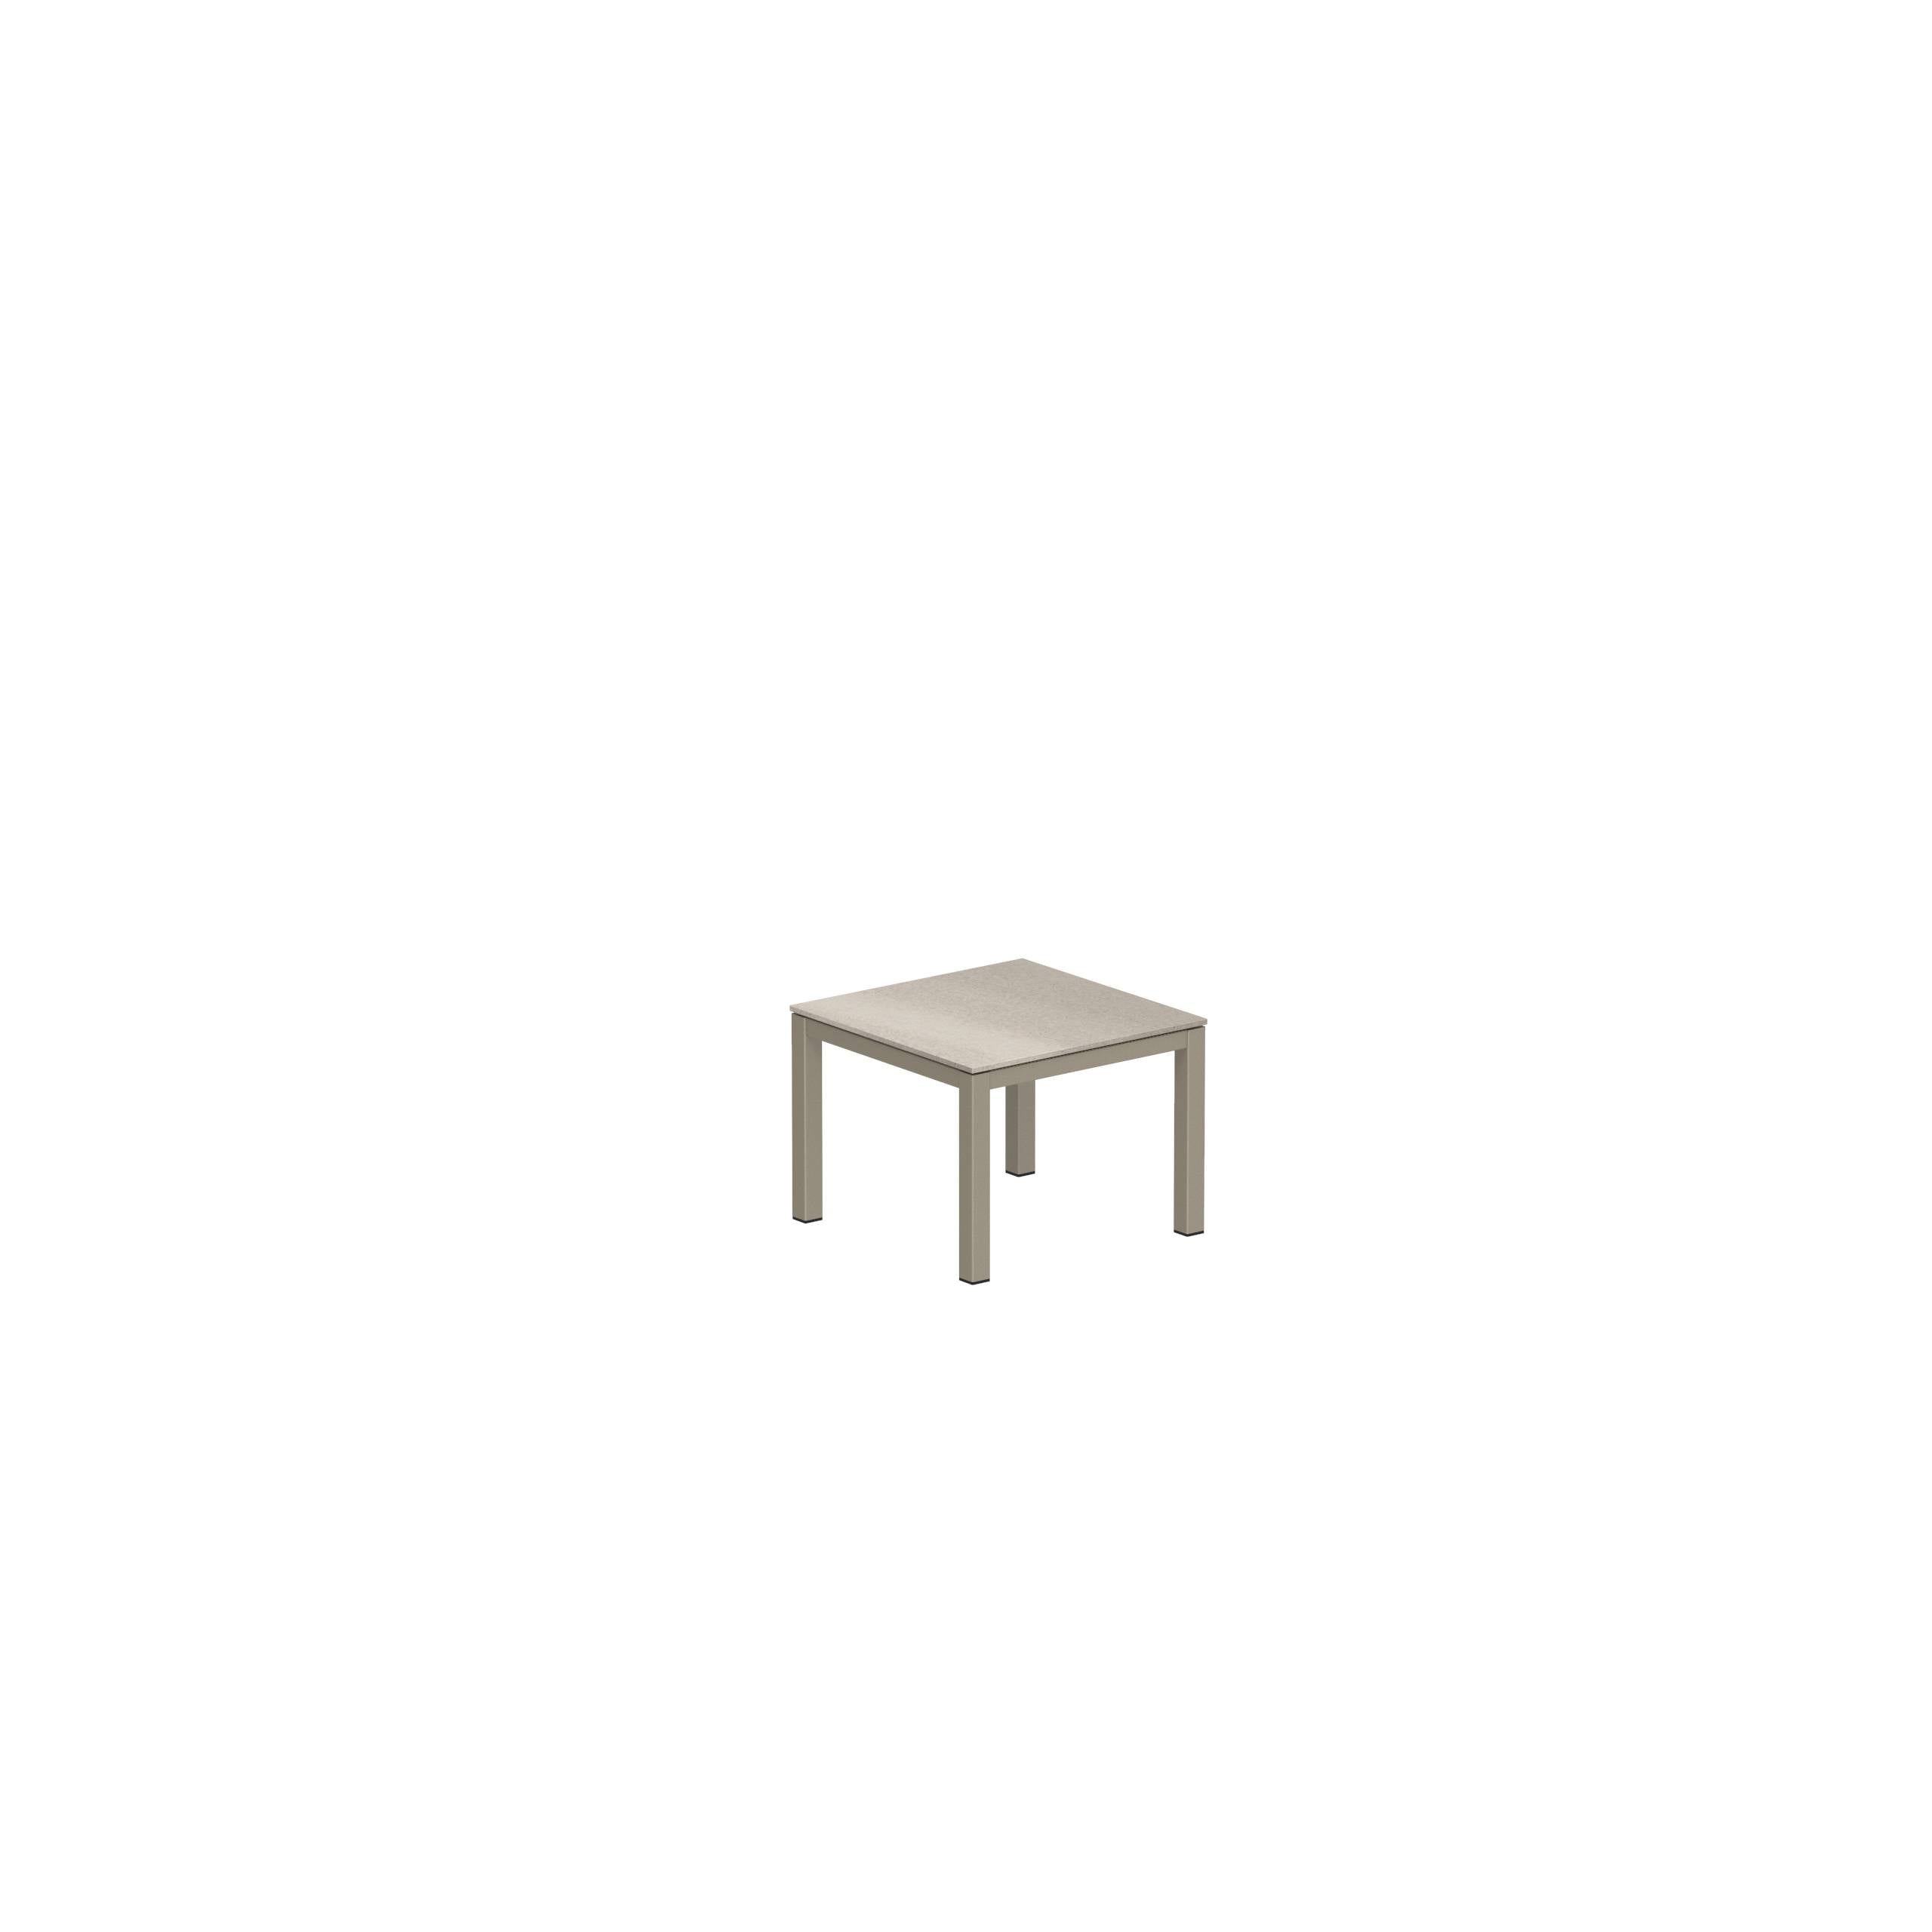 Taboela Table 50x50cm Sand With Ceramic Tabletop Taupe Grey